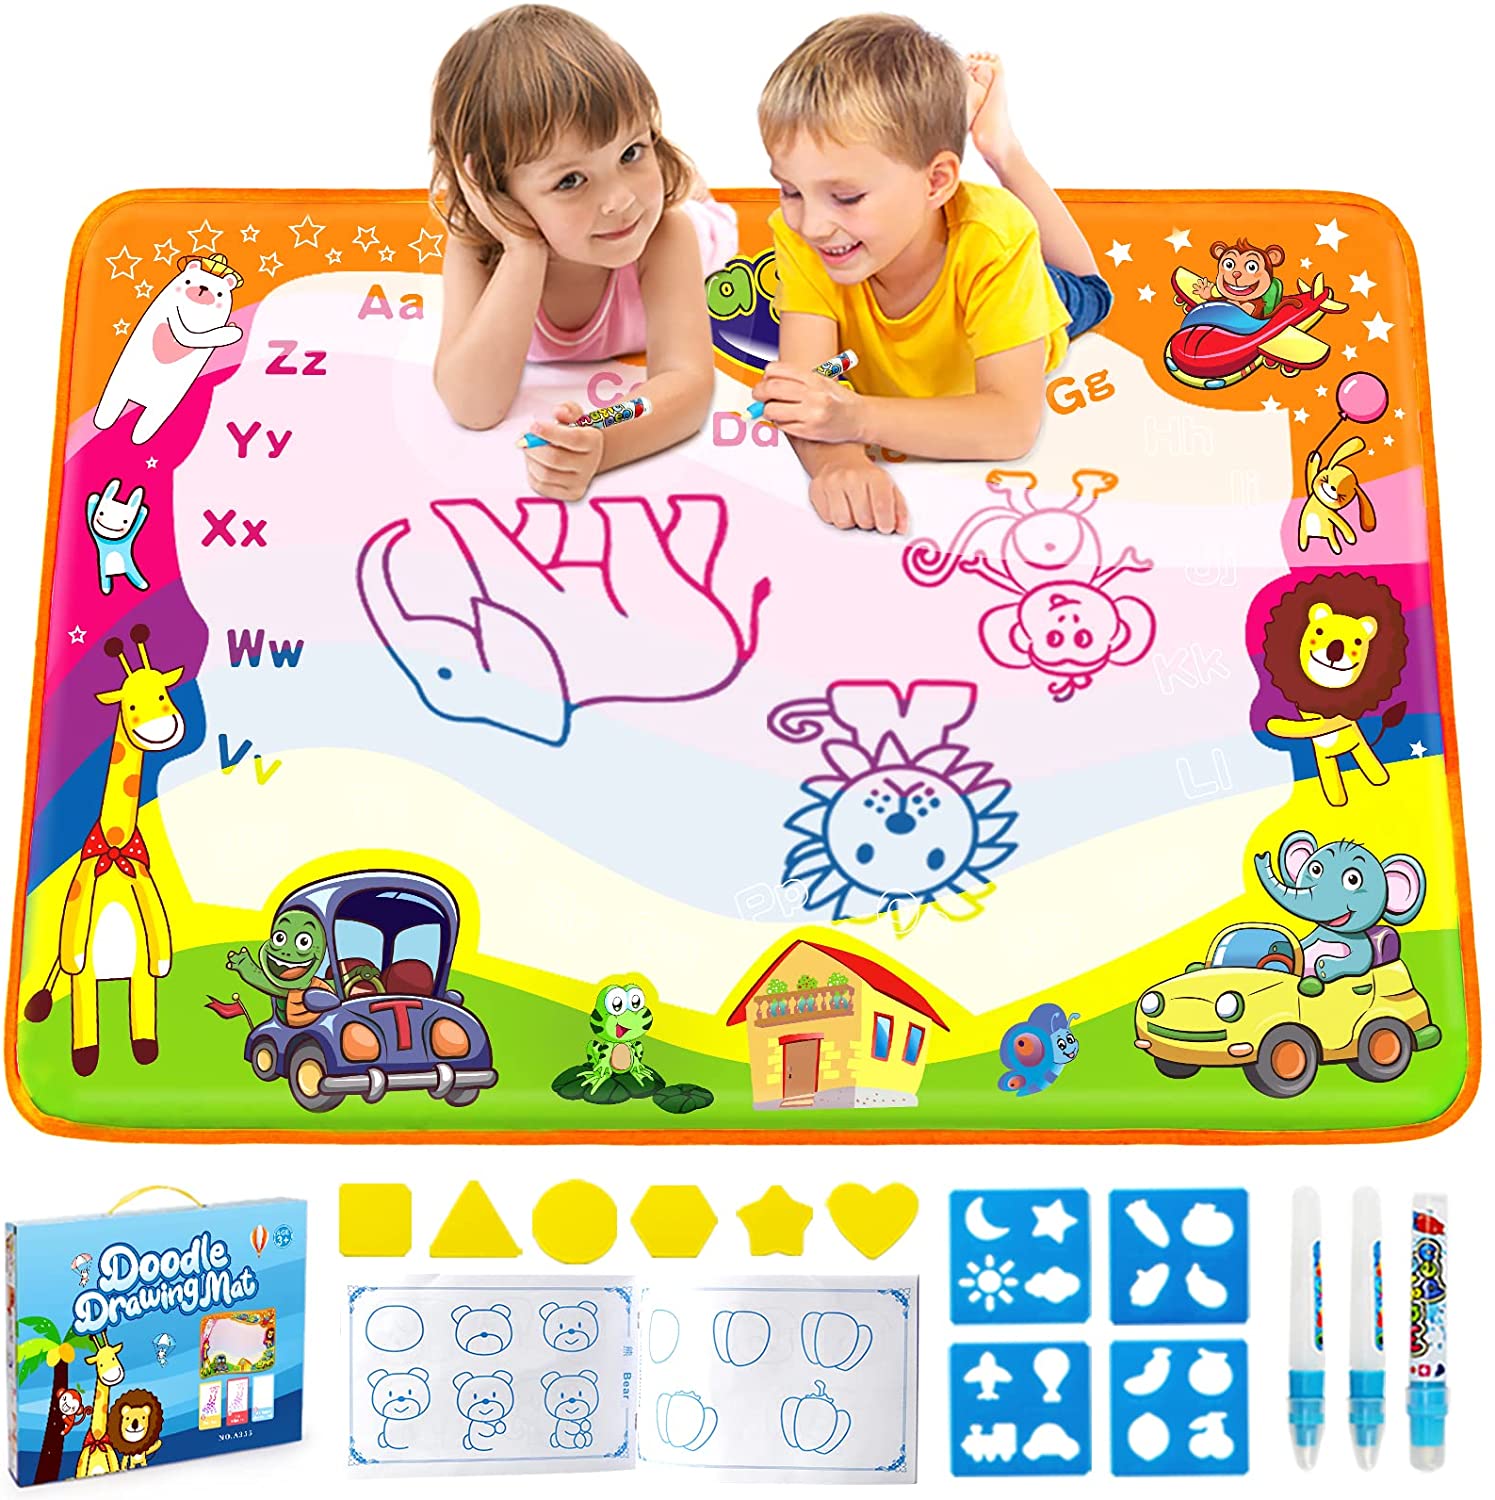 Allaugh 34.5 x 22.5 in Water Drawing Mat Water Doodle Mat for Toddlers 1-3  Years Old Coloring Painting Aqua Doodle Mats Educational Toys Boys Xmas  Gift, Orange 